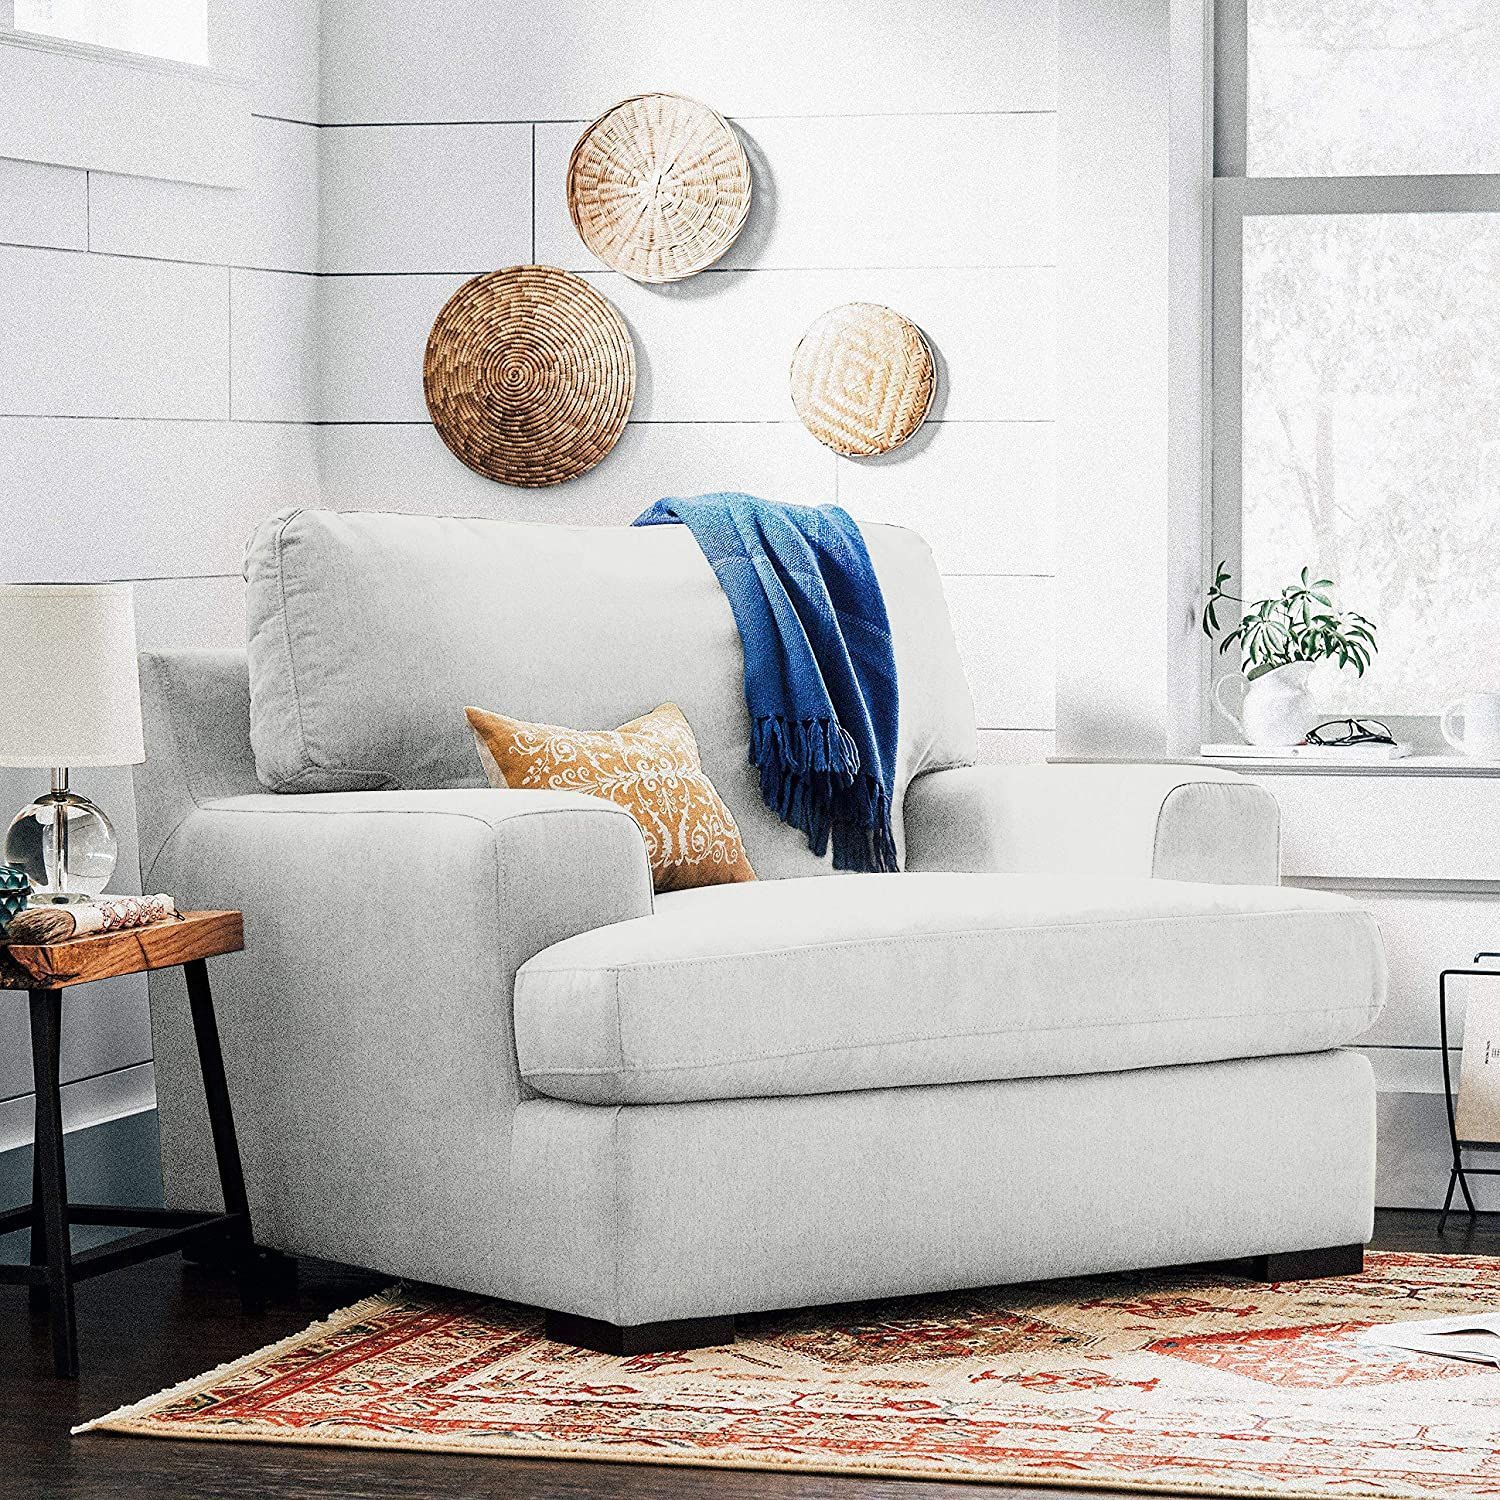 16 Best Comfy Couches And Chairs Coziest Furniture To Buy